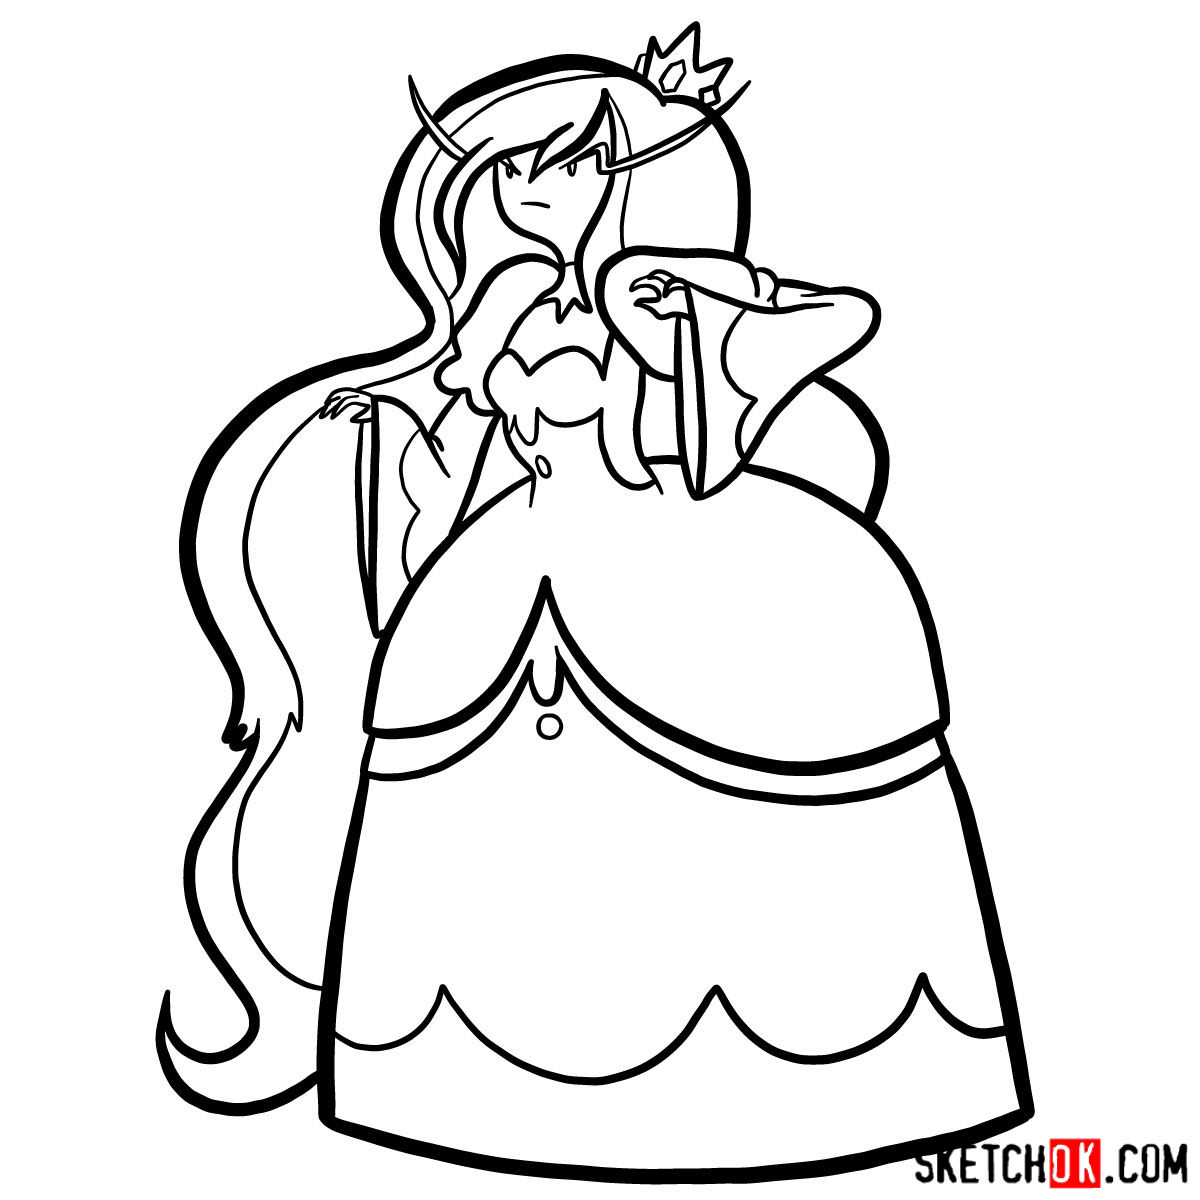 Ice Queen coloring page – Free Printable PDF